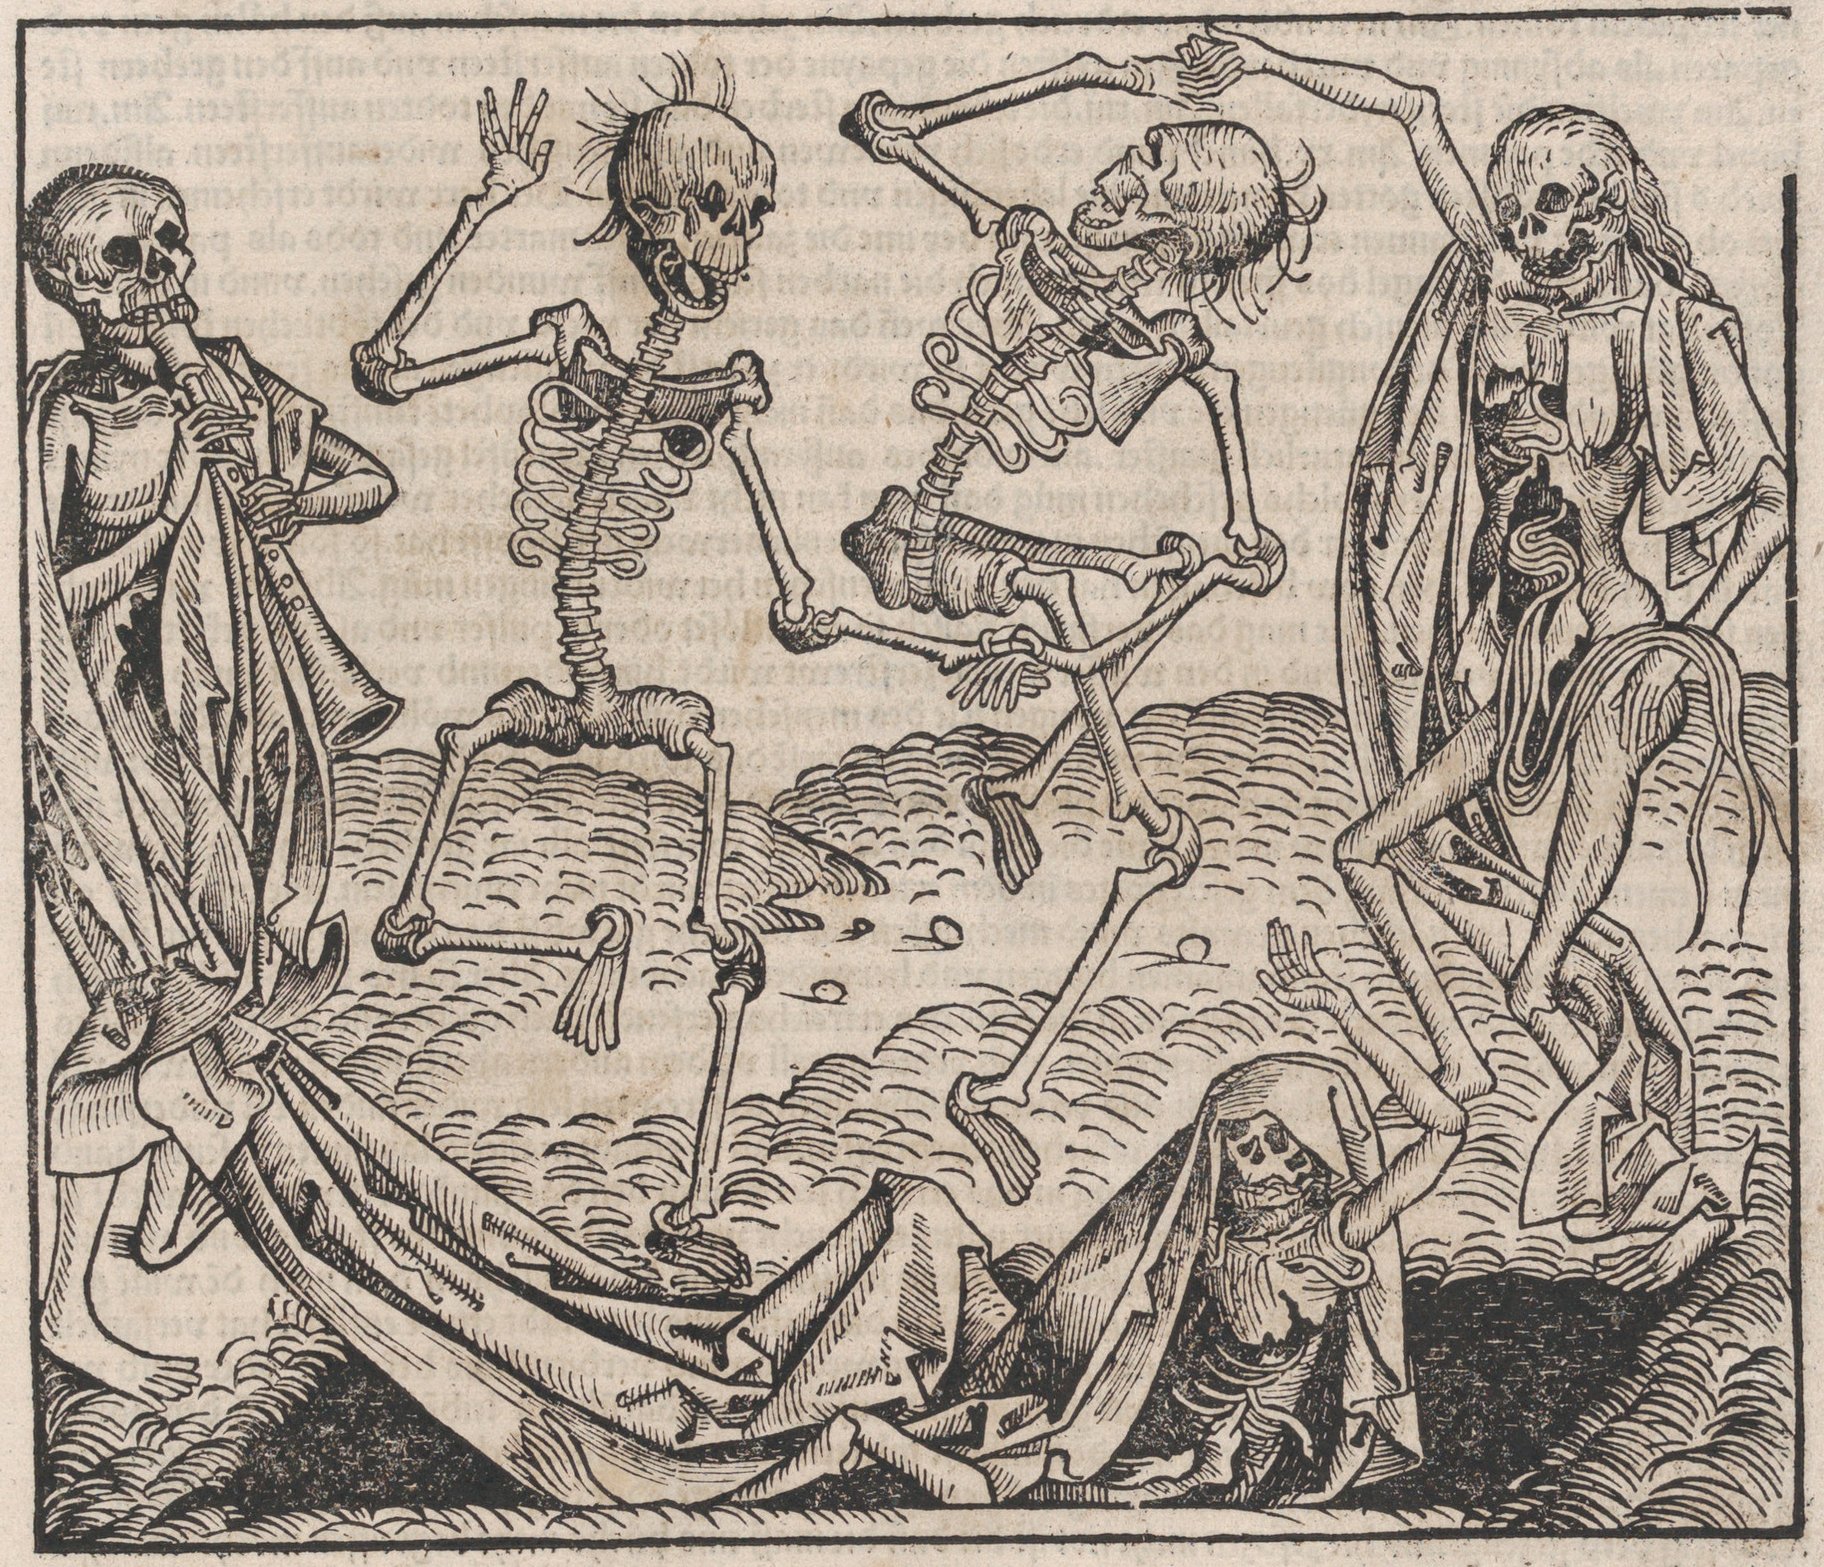 Dance of Death, leaf from "The Nuremberg Chronicle" (c) The Met